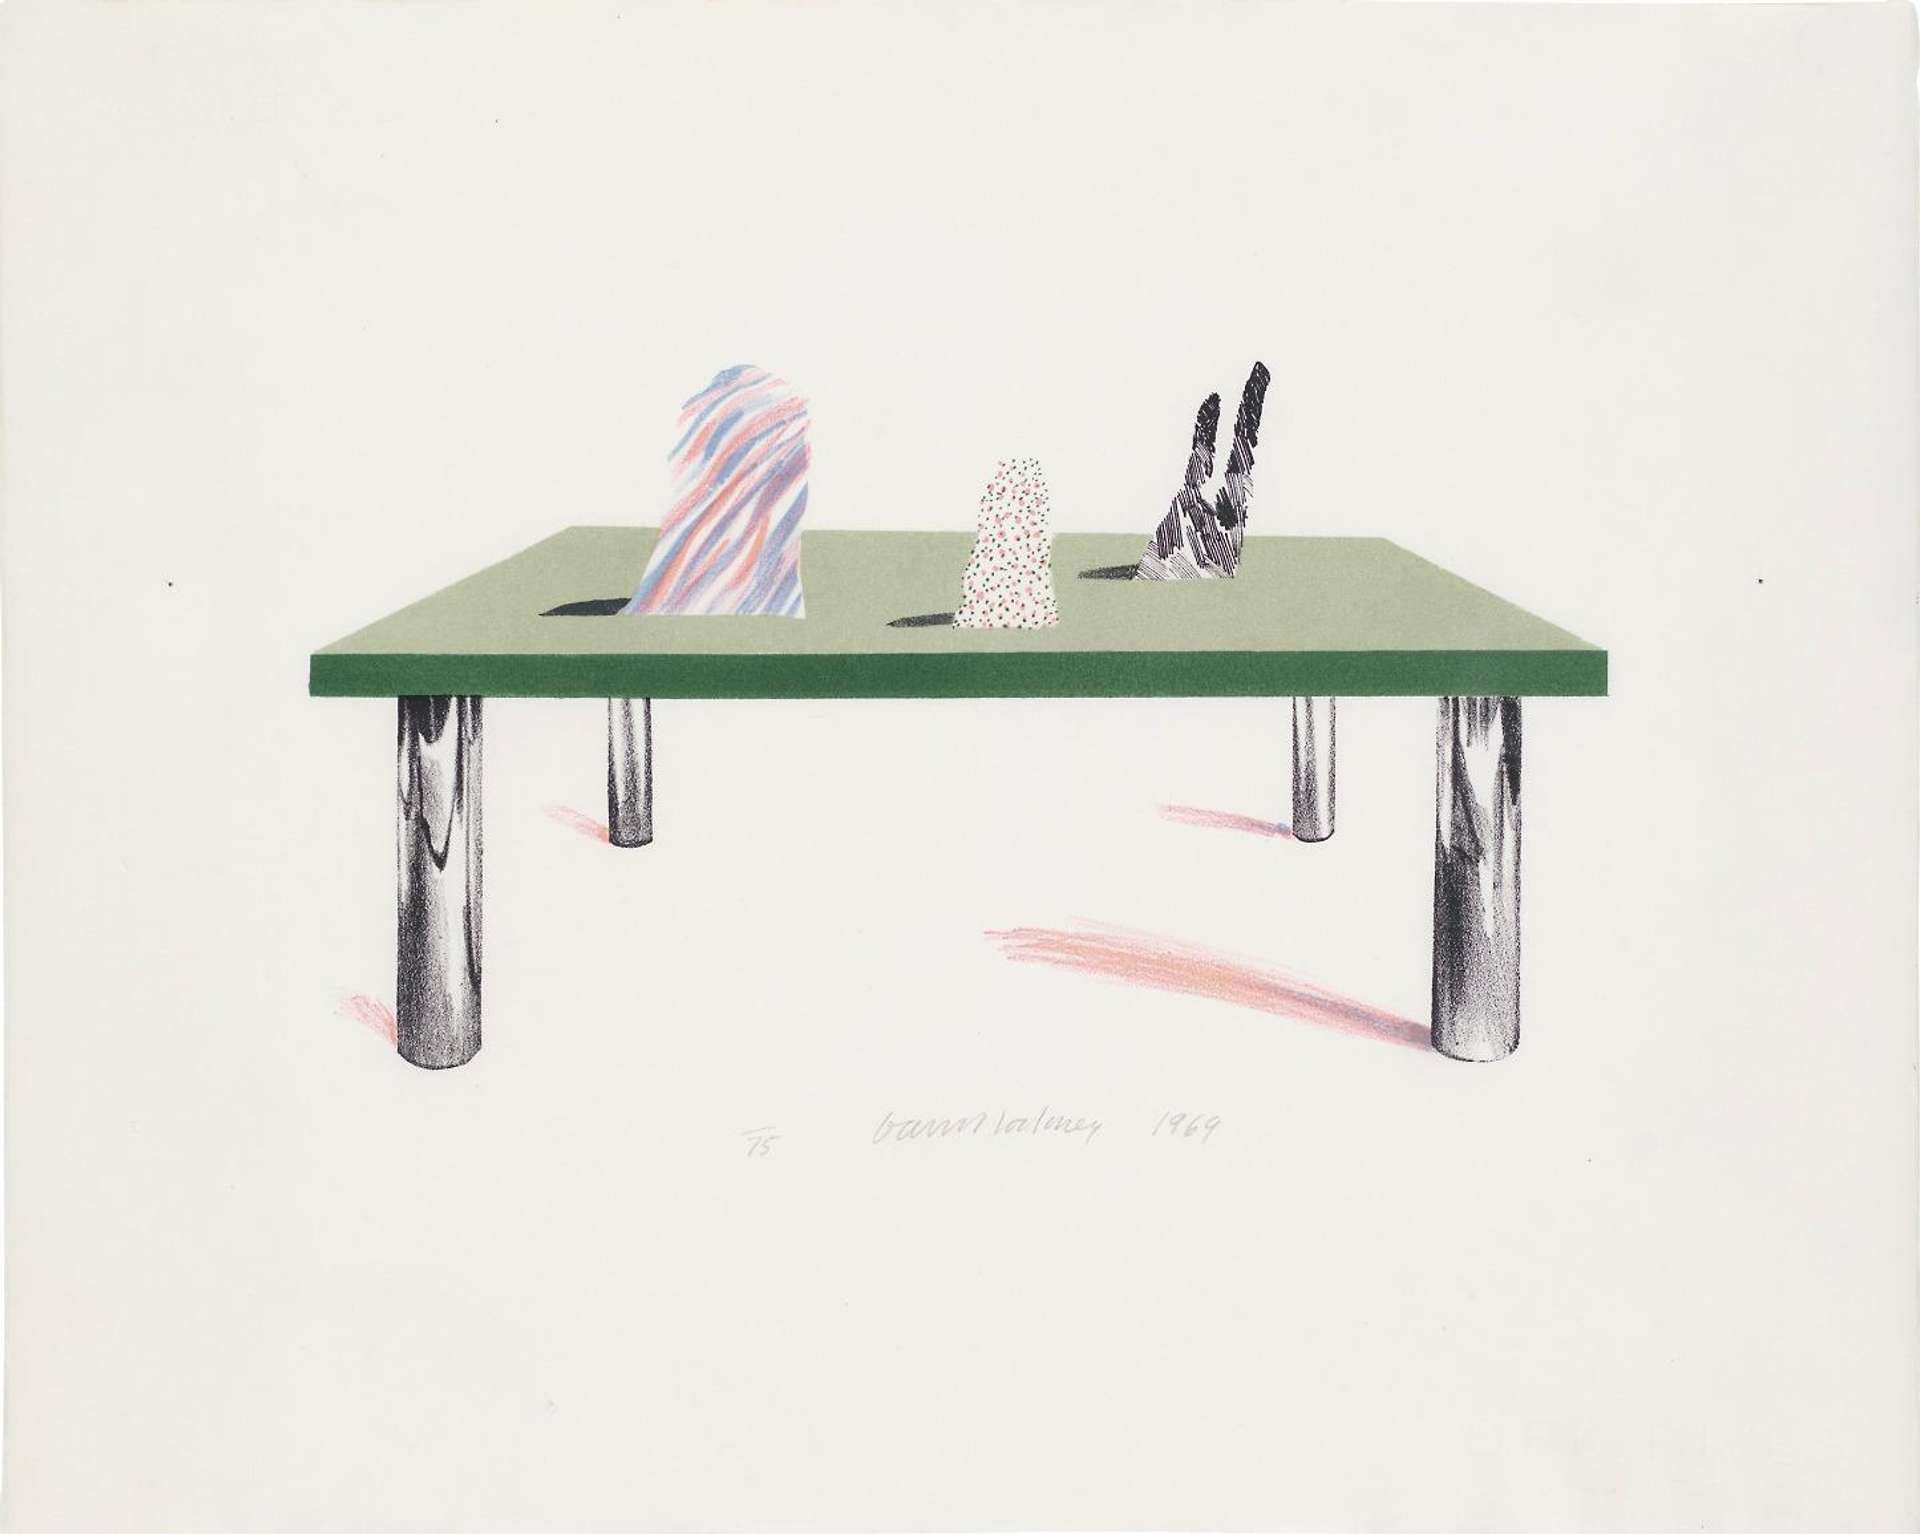 David Hockney: Glass Table With Objects - Signed Print